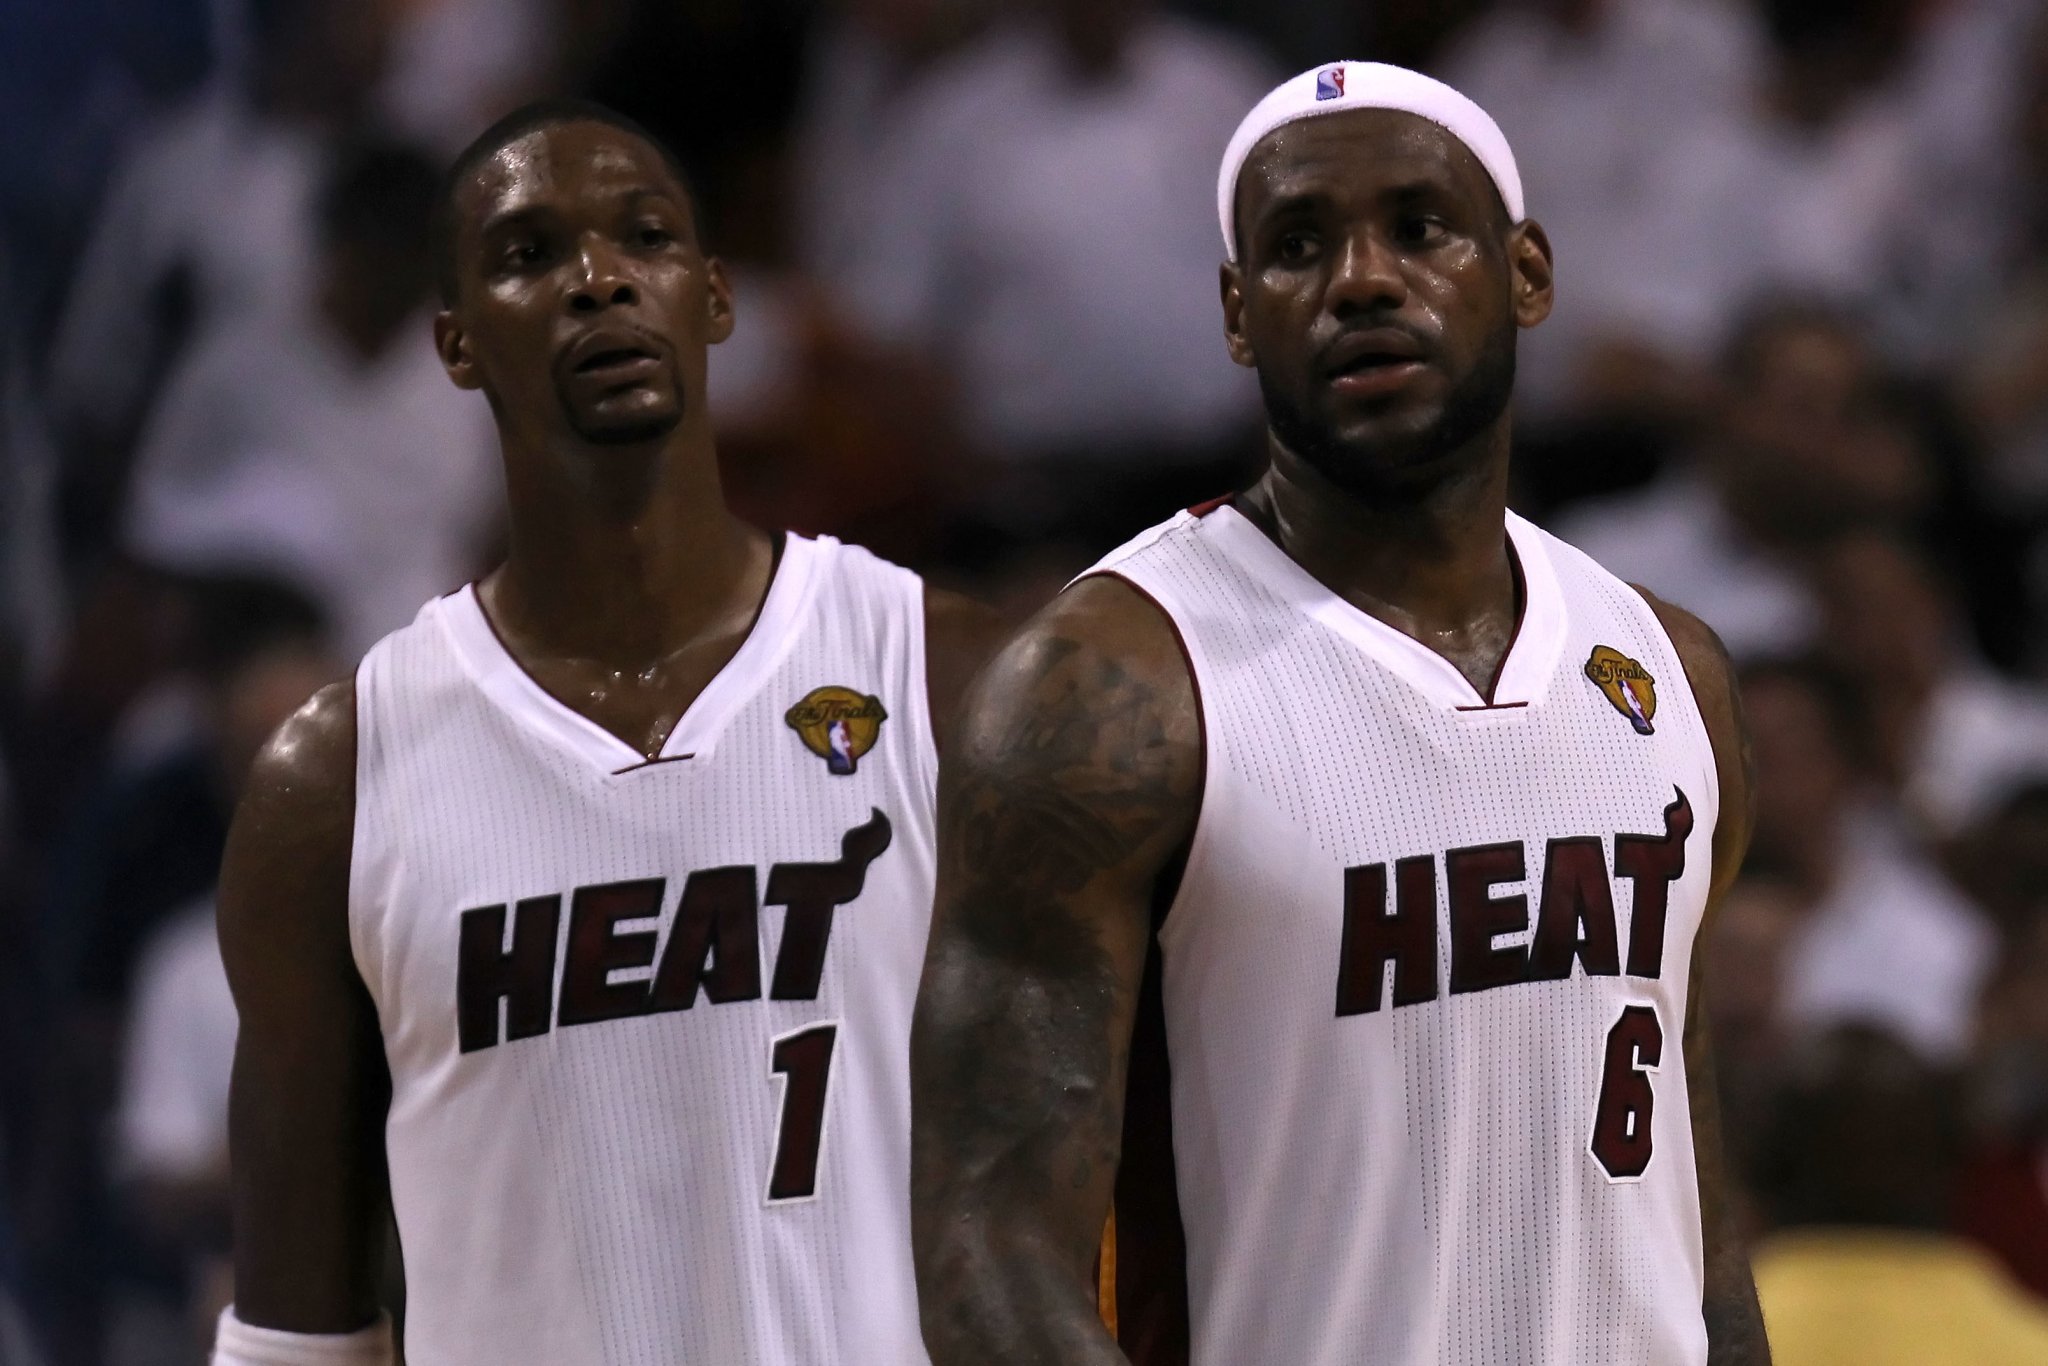 Chris Bosh Says He Was Upset With LeBron James For Telling Him He Was Leaving The Miami Heat Via Text Message